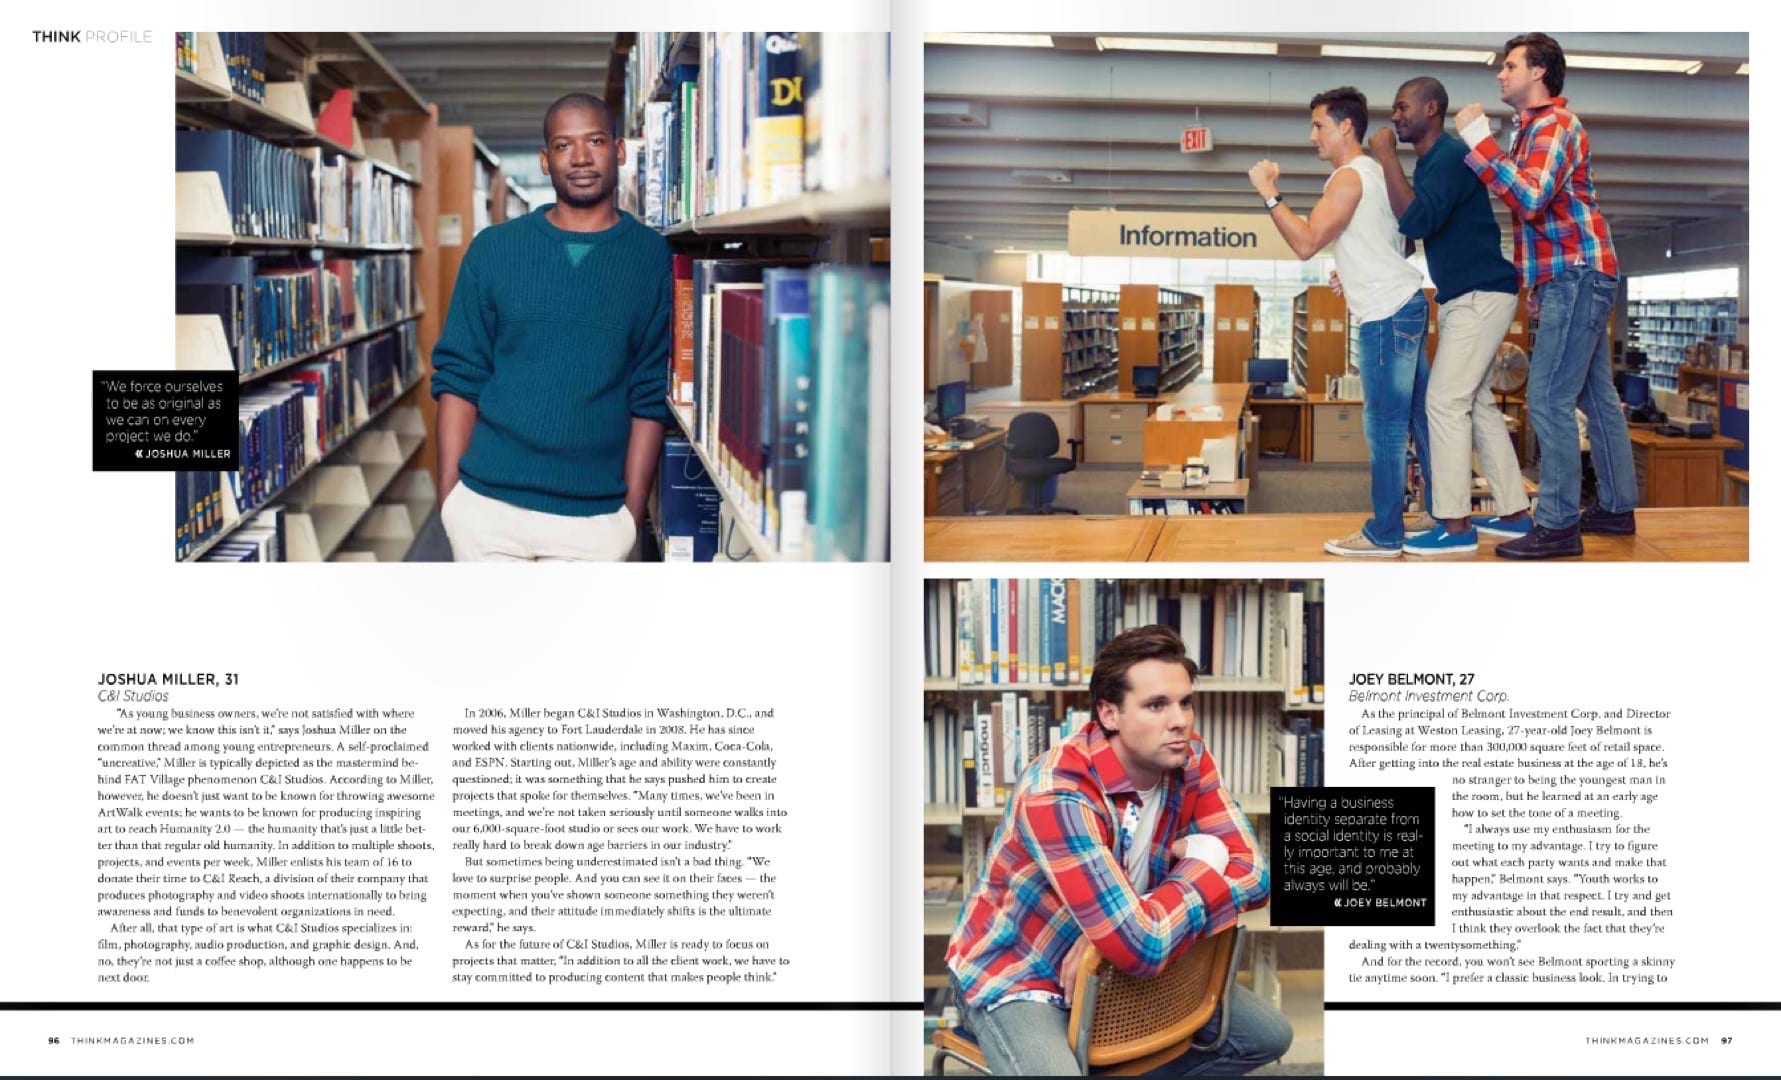 Pages from Think Magazine about Joshua Miller and Joey Belmont